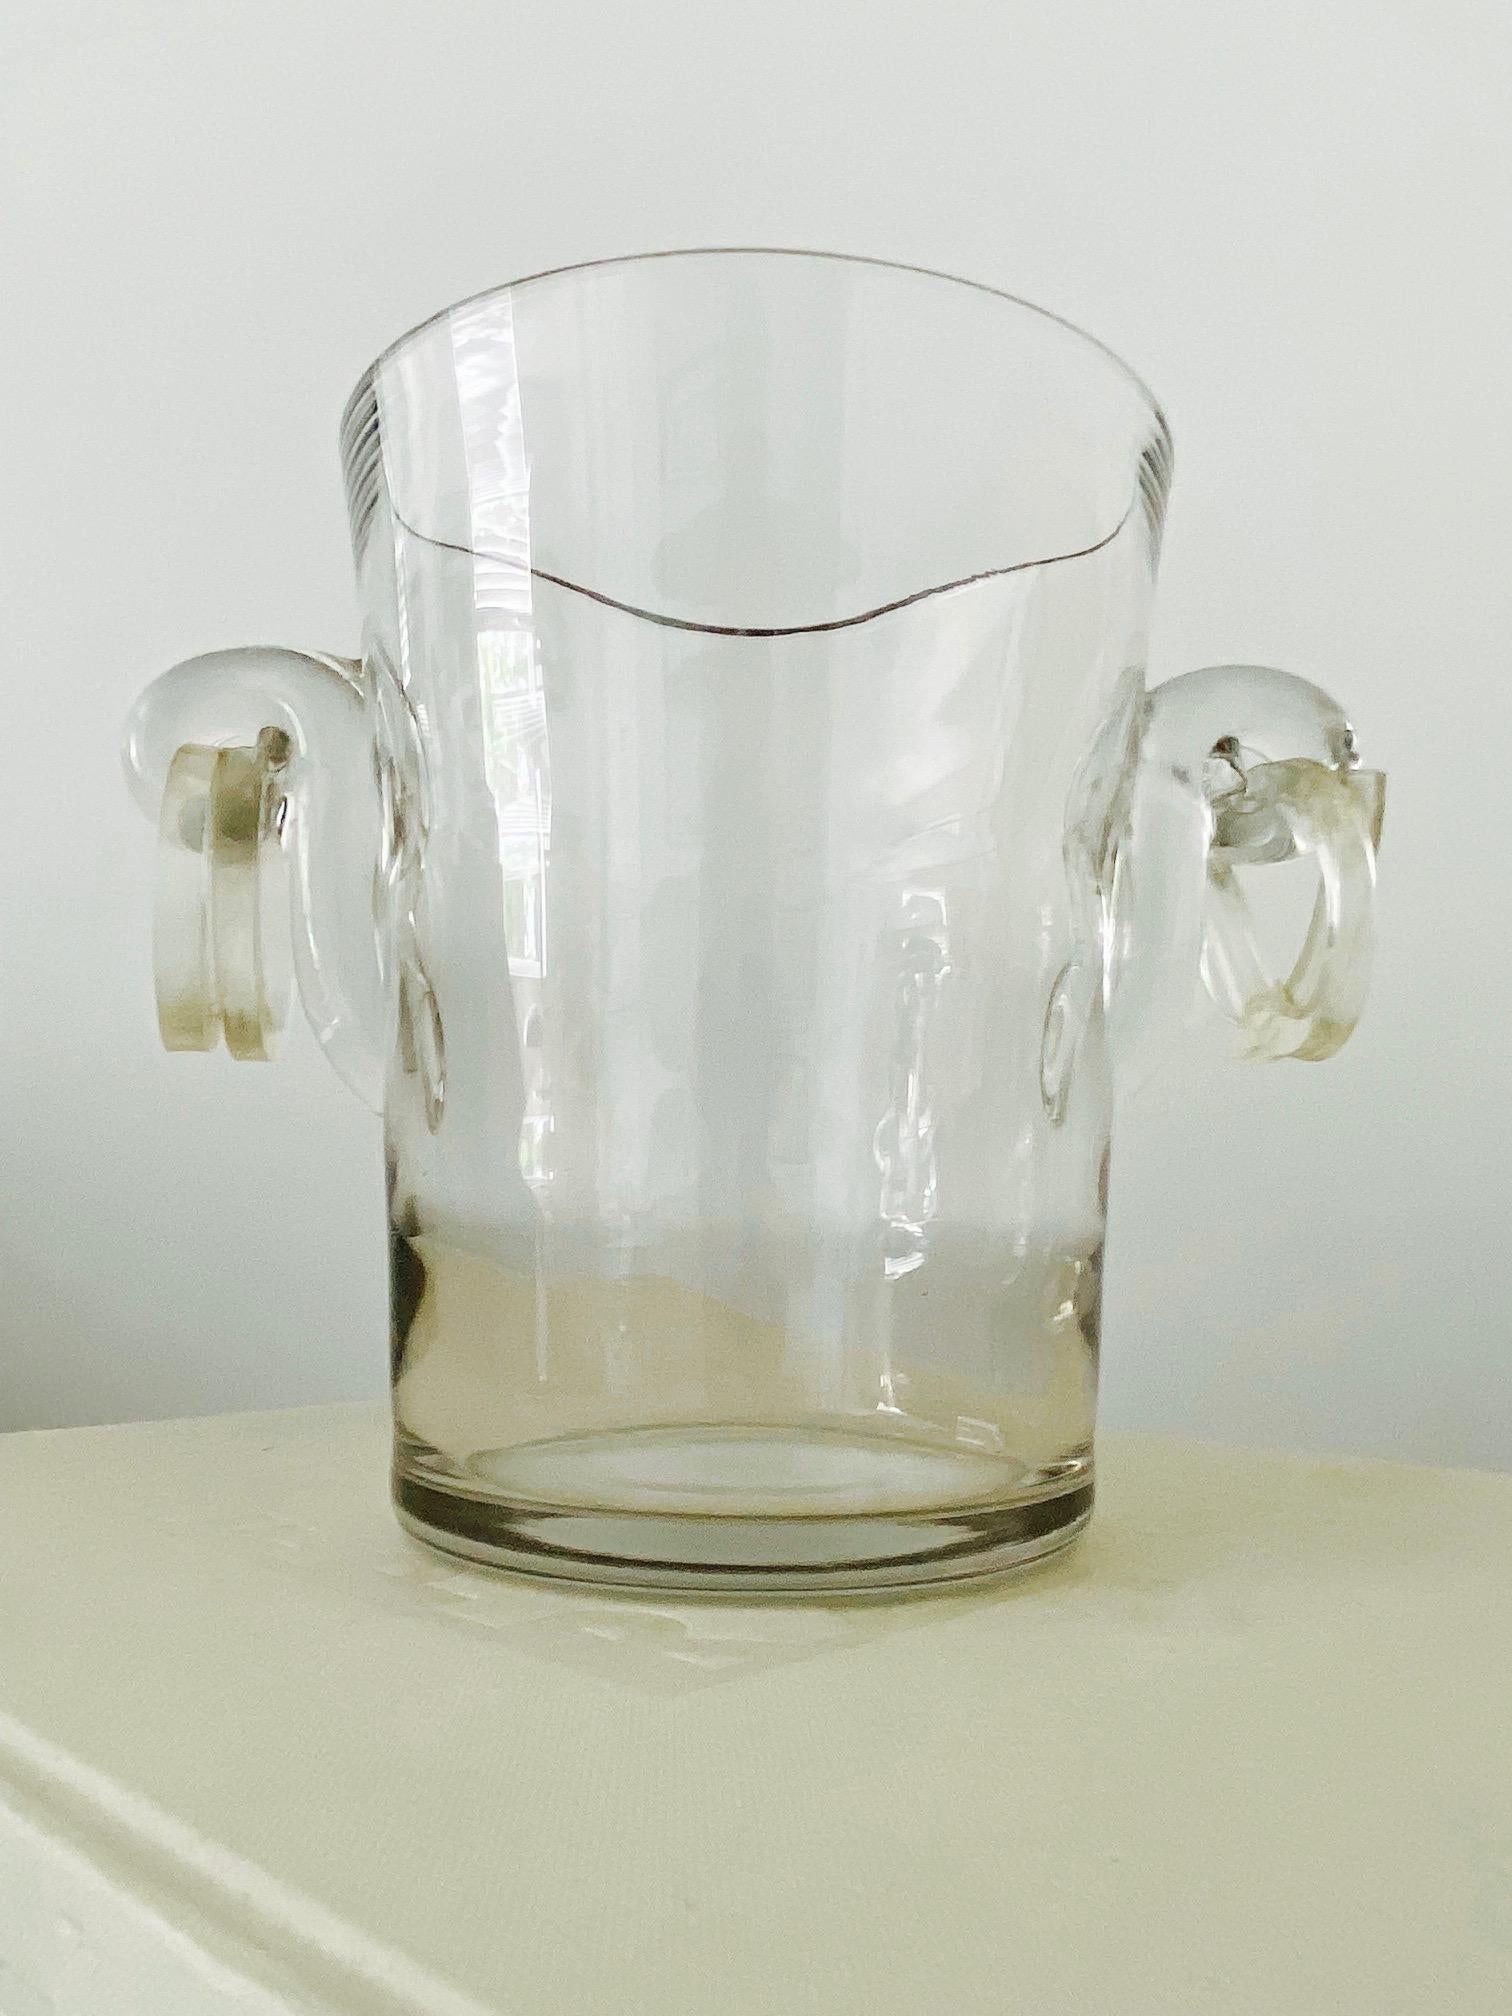 Beveled Vintage Italian Crystal Champagne Cooler with Lucite Handles, c. 1970's